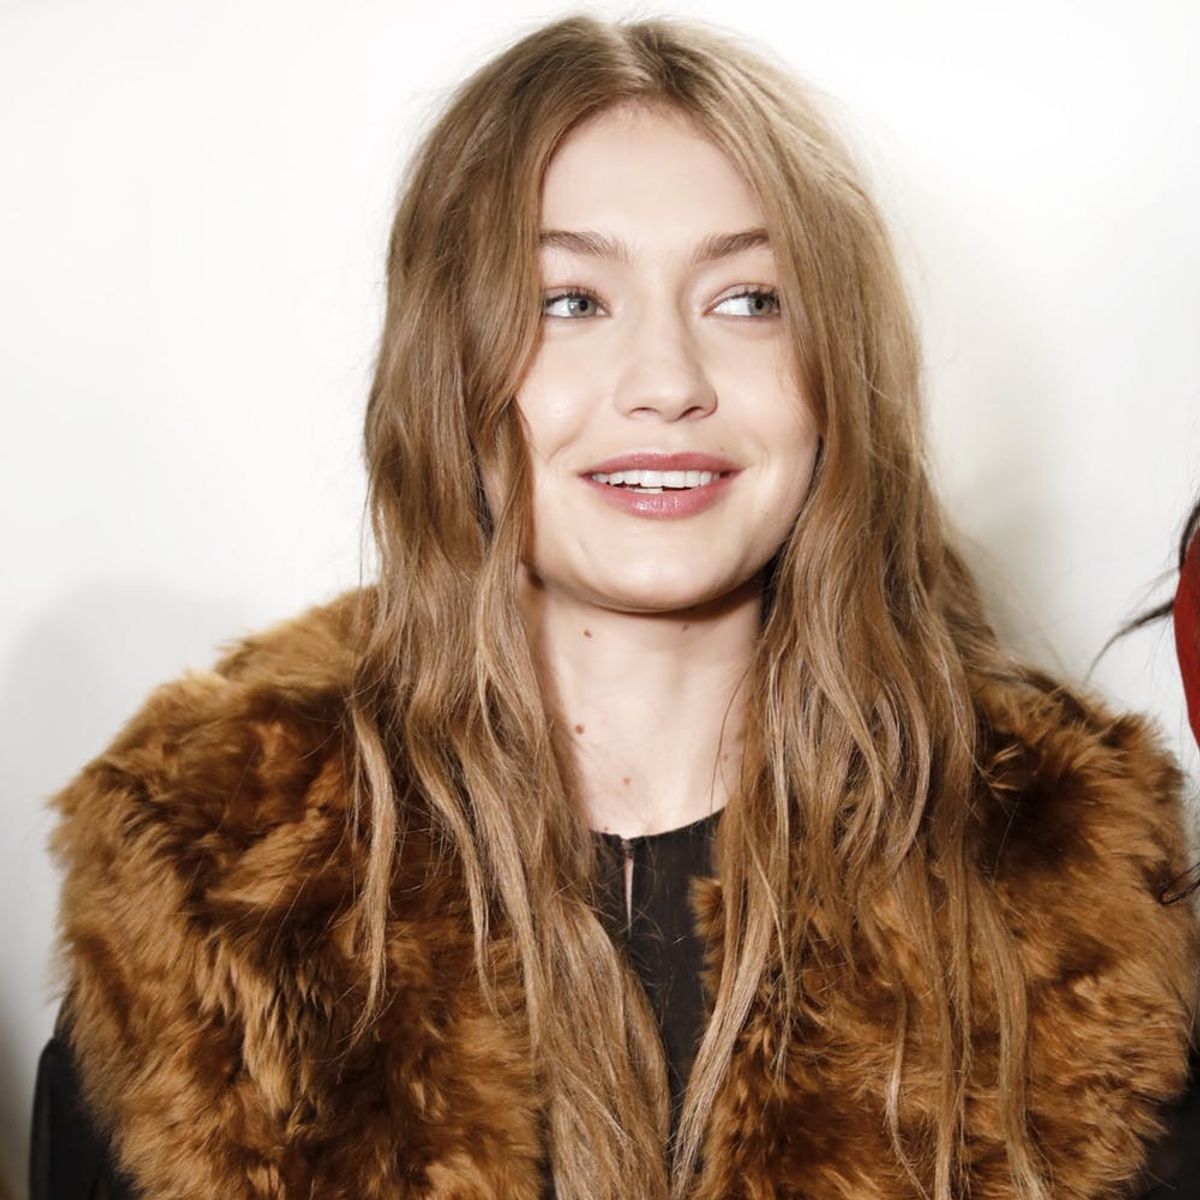 People Are Already Furious About Gigi Hadid’s Vogue Arabia Cover